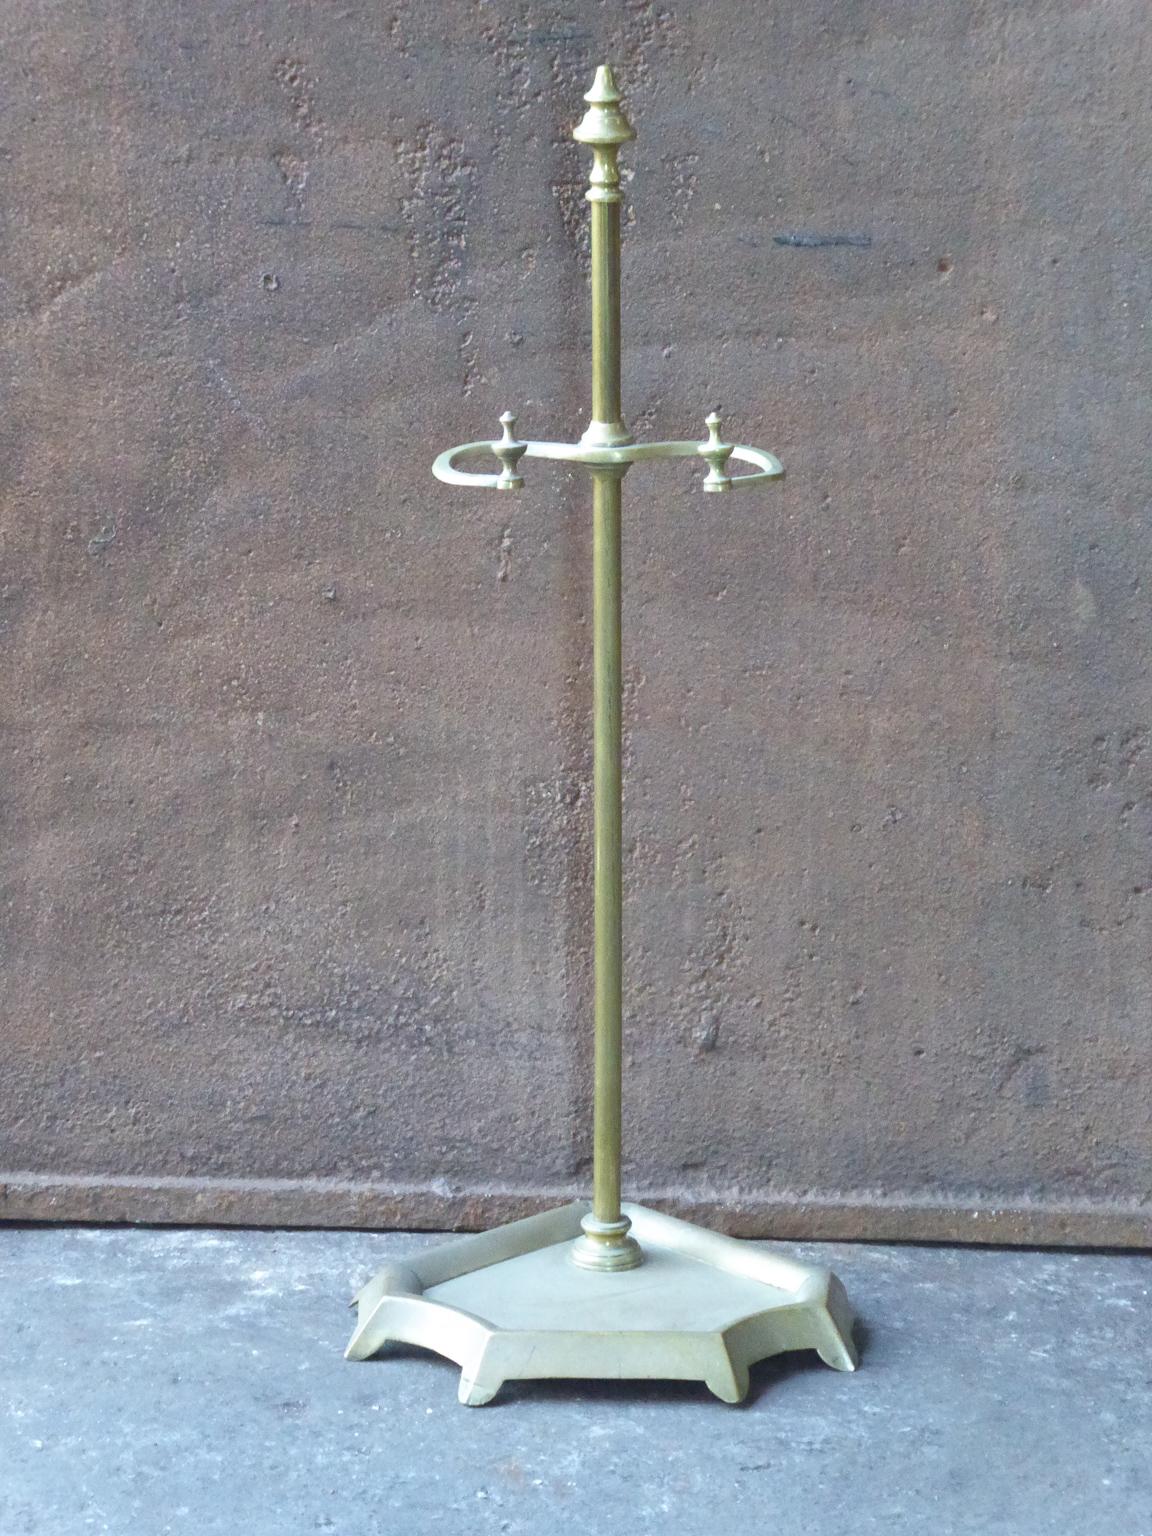 19th century French Napoleon III fireplace tool stand. The stand is made of brass. The stand is in a good condition and is fully functional.








 